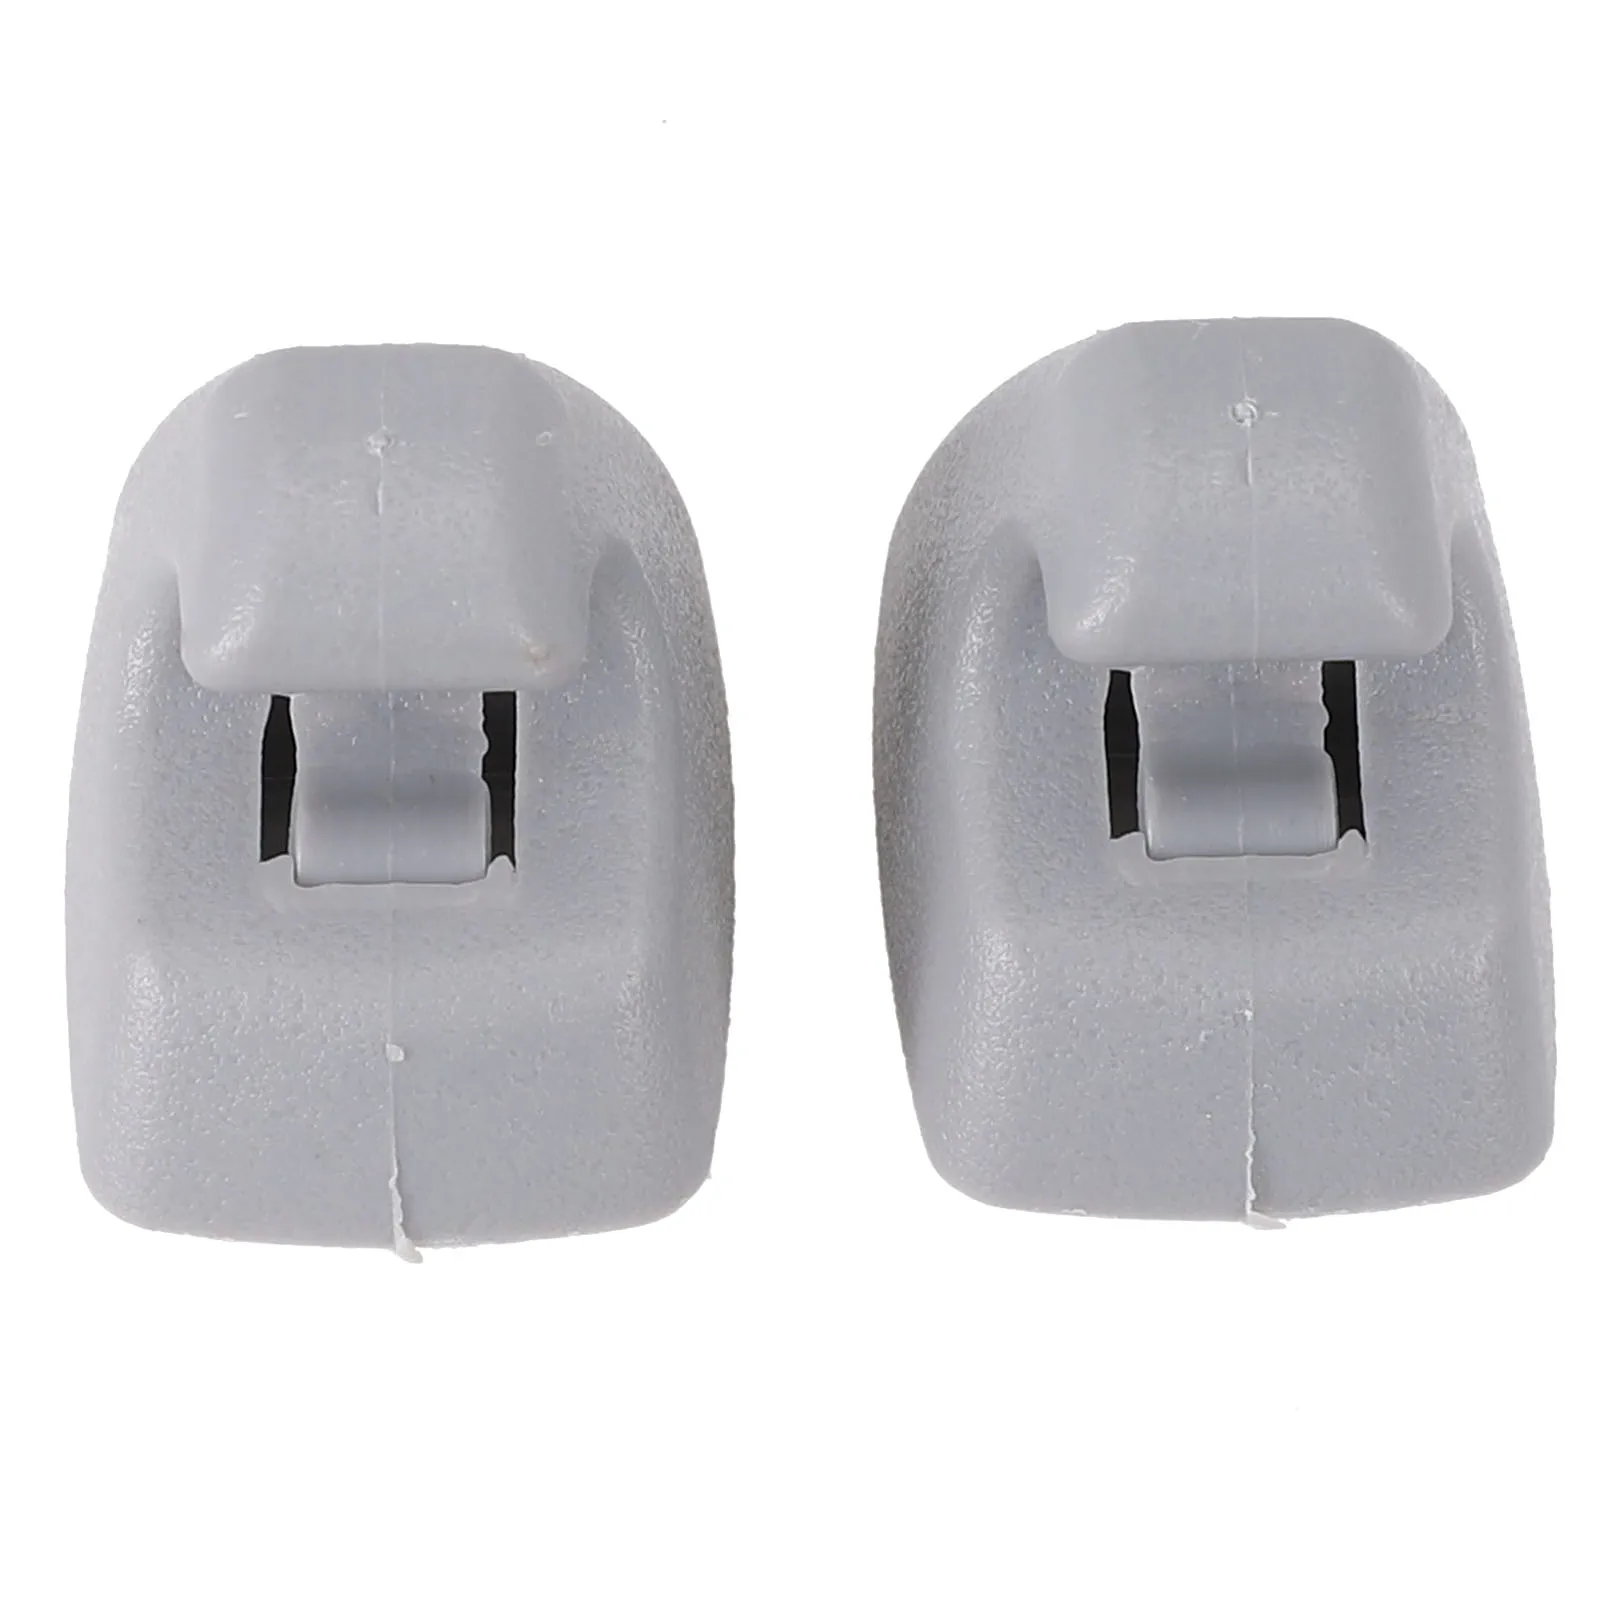 

Car Sun Visor Fixing Clip For G&M 95994975 Gray Retainer Support Clip 2 Pcs 37mm X 24mm X 30mm Quality Durable